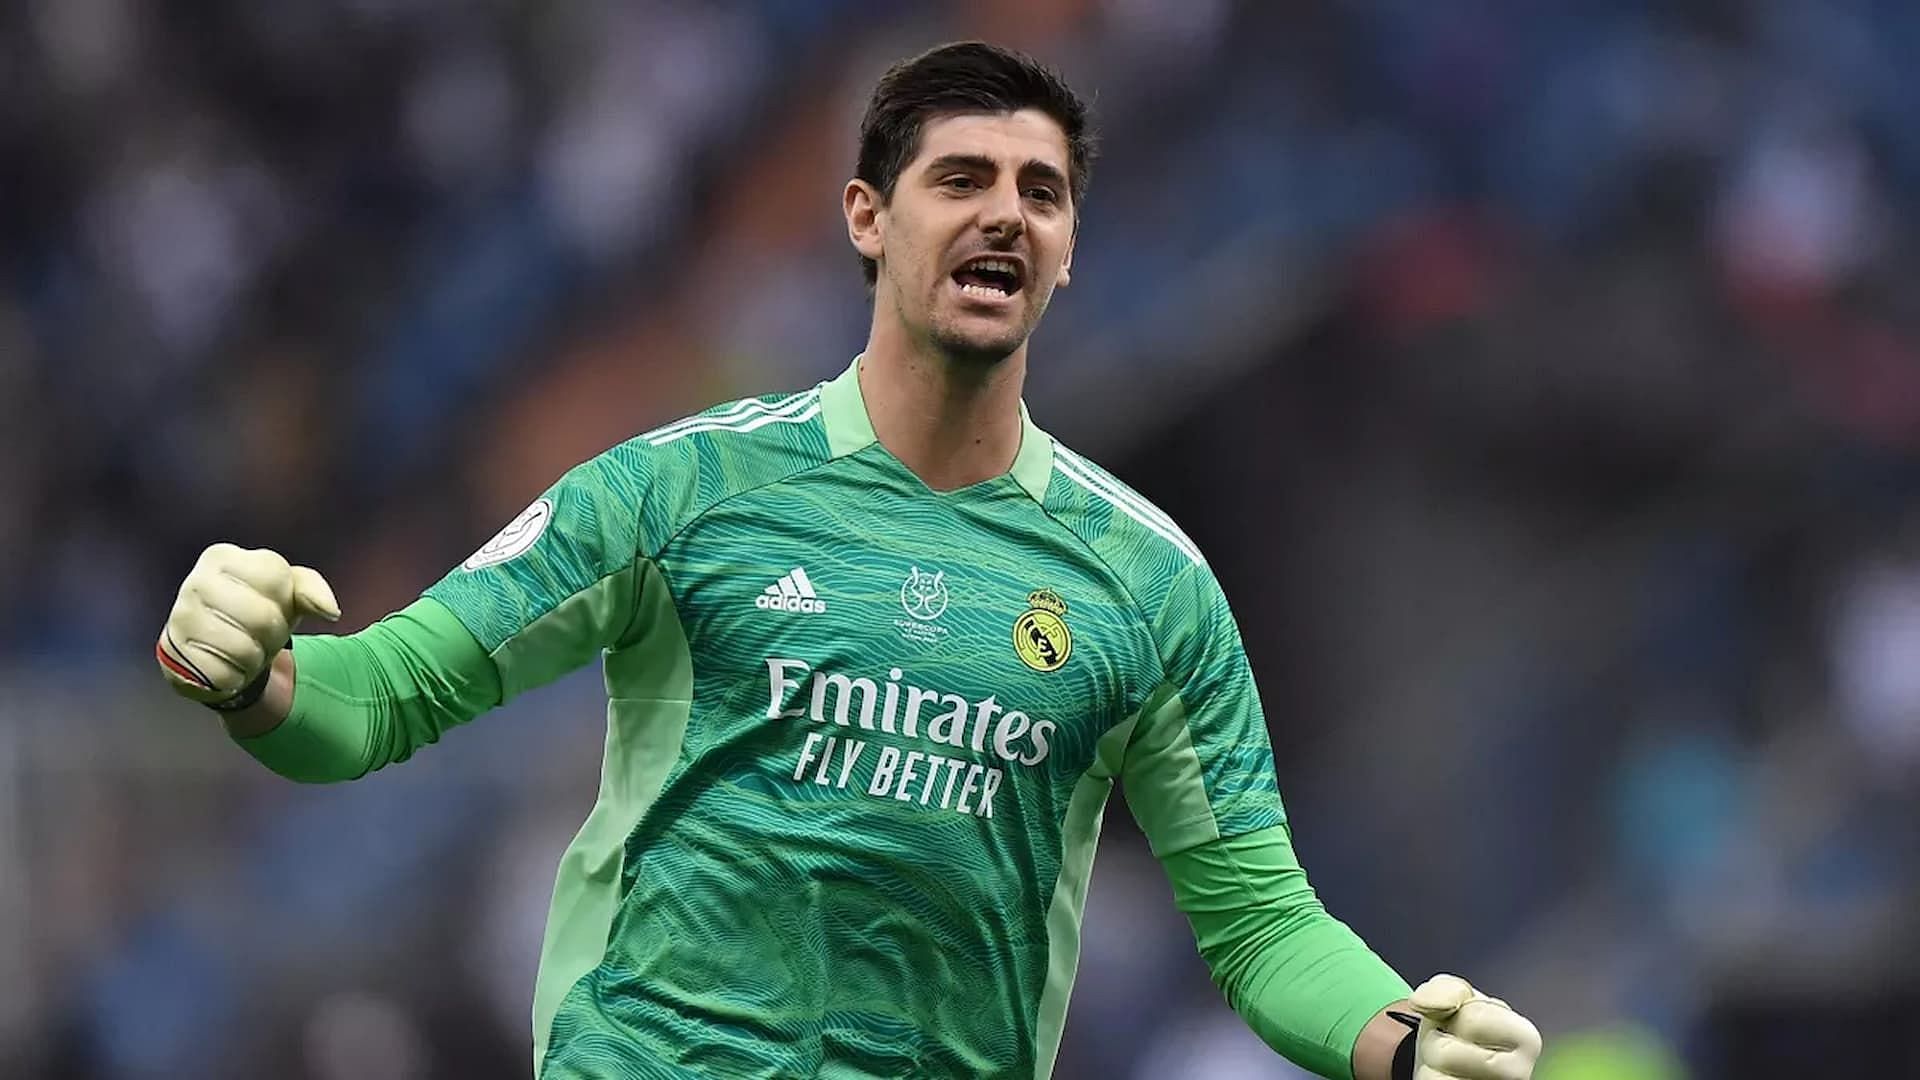 Thibaut Courtois at Real Madrid (Image via Getty)